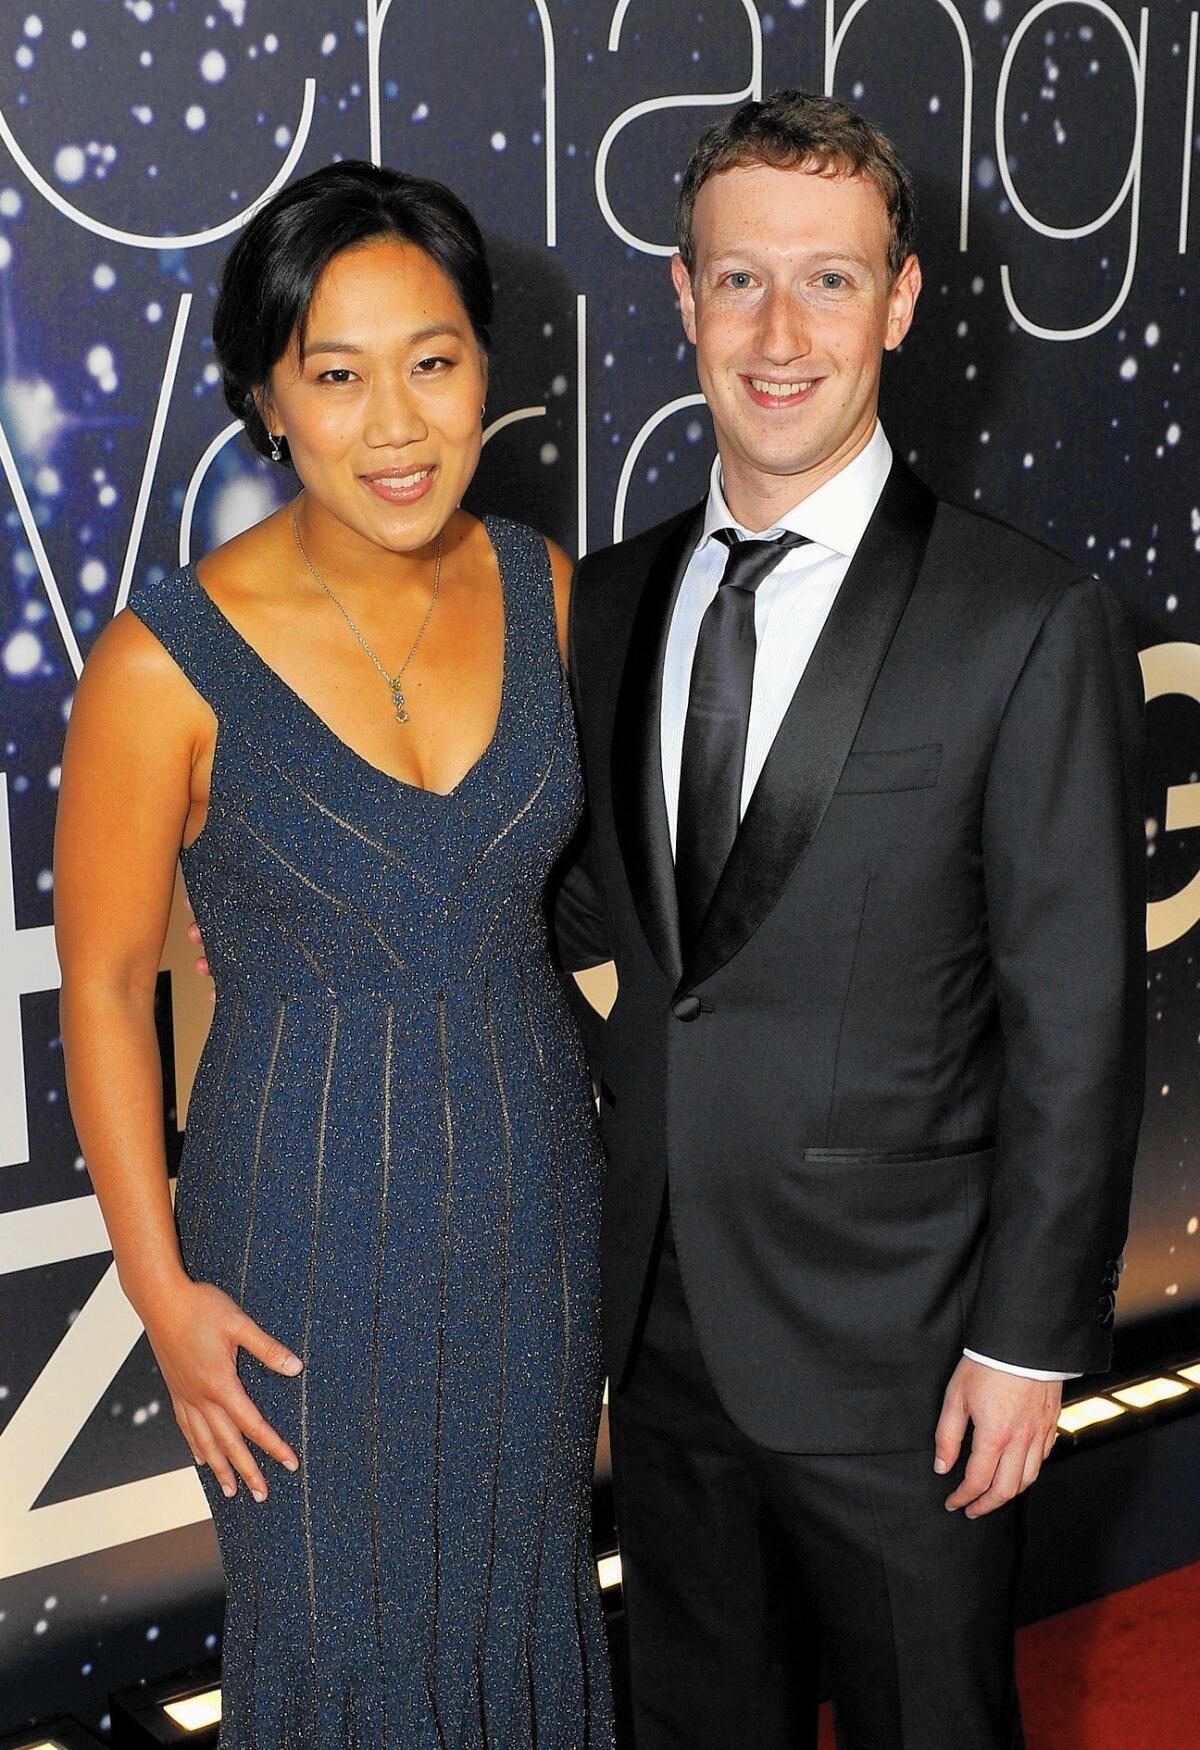 Facebook founder Mark Zuckerberg and his wife, Priscilla Chan, announced they would be donating 99% of their shares in Facebook, an amount currrently worth $45 billion.